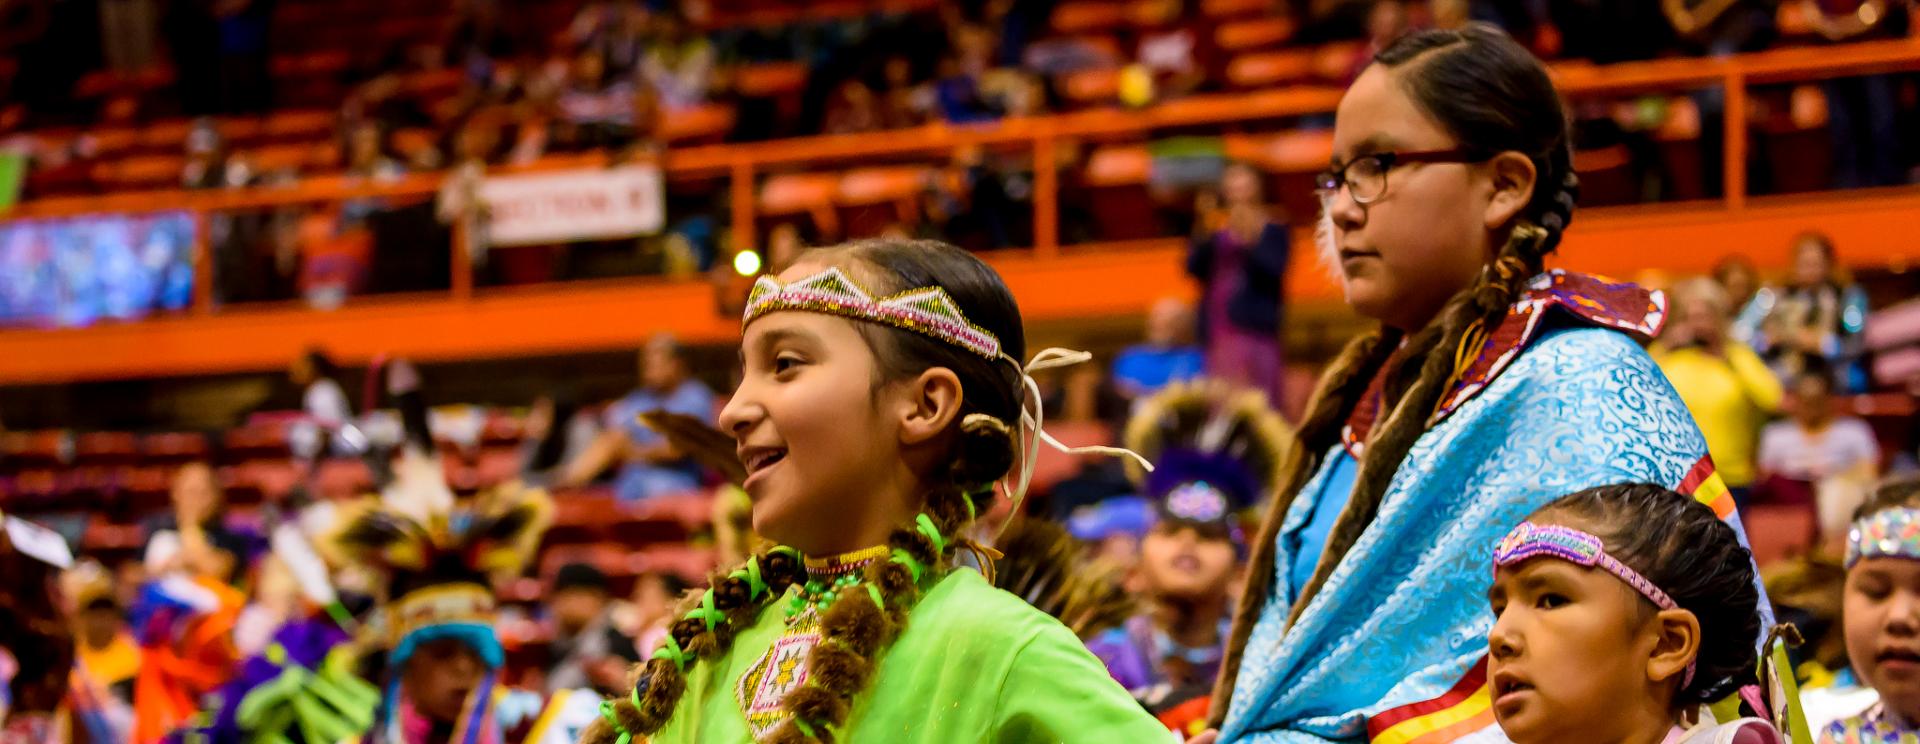 "Come Dance With Us"—Culture and Community at the Black Hills Powwow